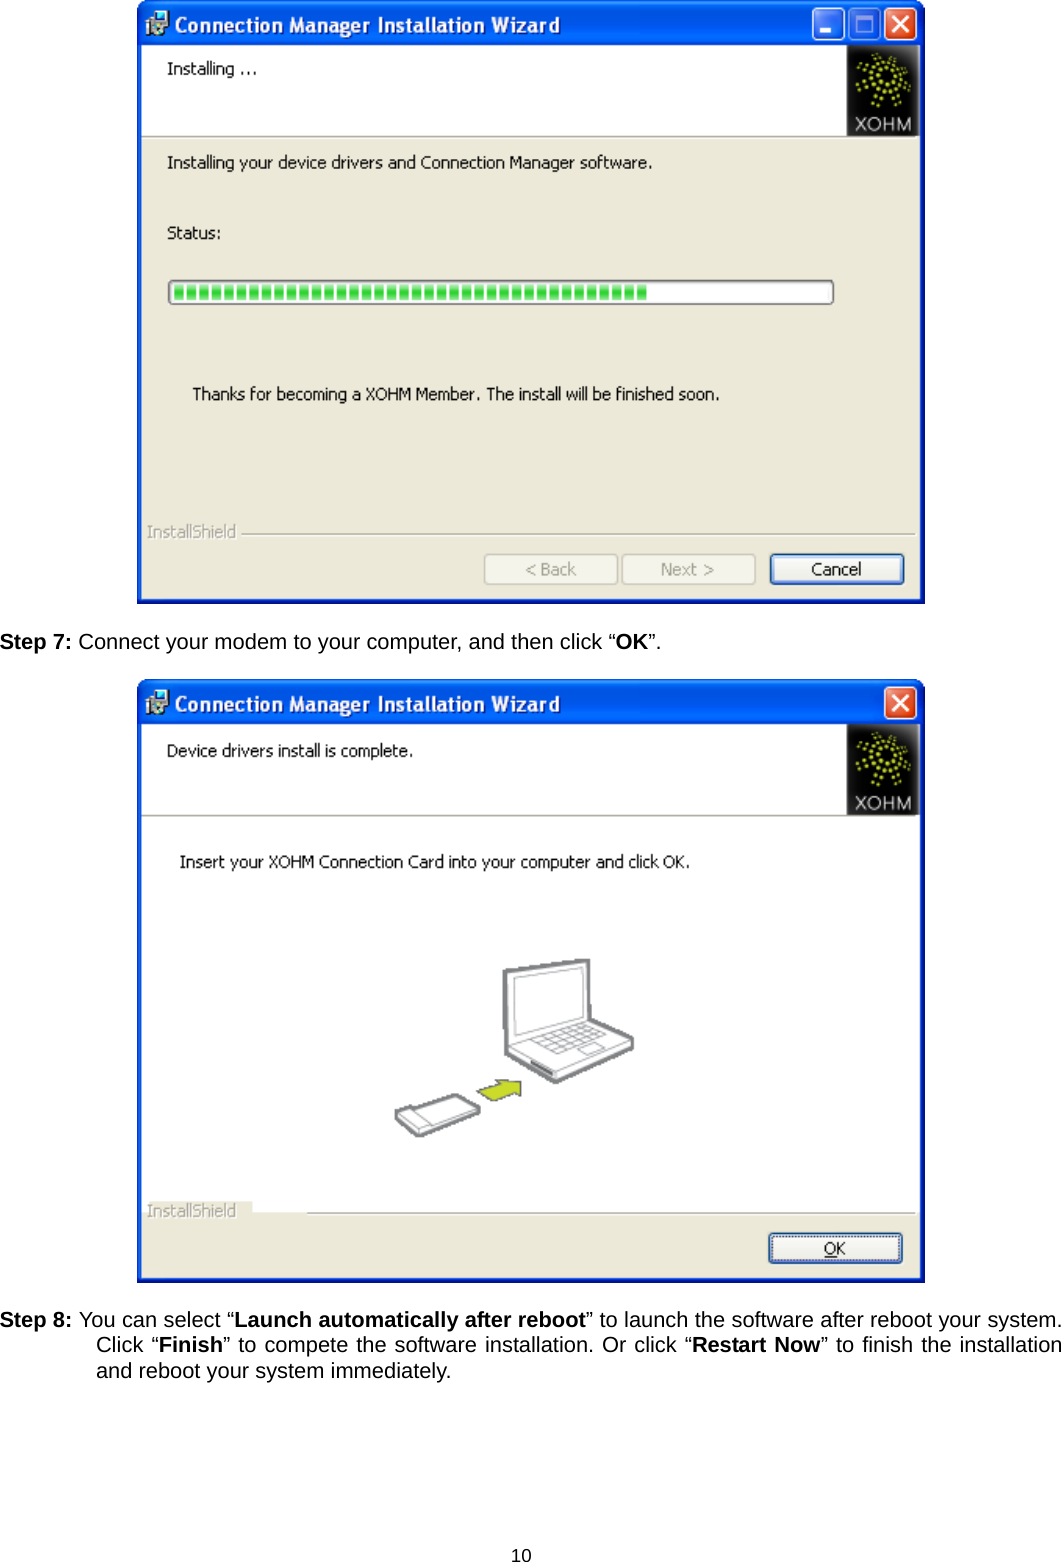  10  Step 7: Connect your modem to your computer, and then click “OK”.    Step 8: You can select “Launch automatically after reboot” to launch the software after reboot your system. Click “Finish” to compete the software installation. Or click “Restart Now” to finish the installation and reboot your system immediately. 